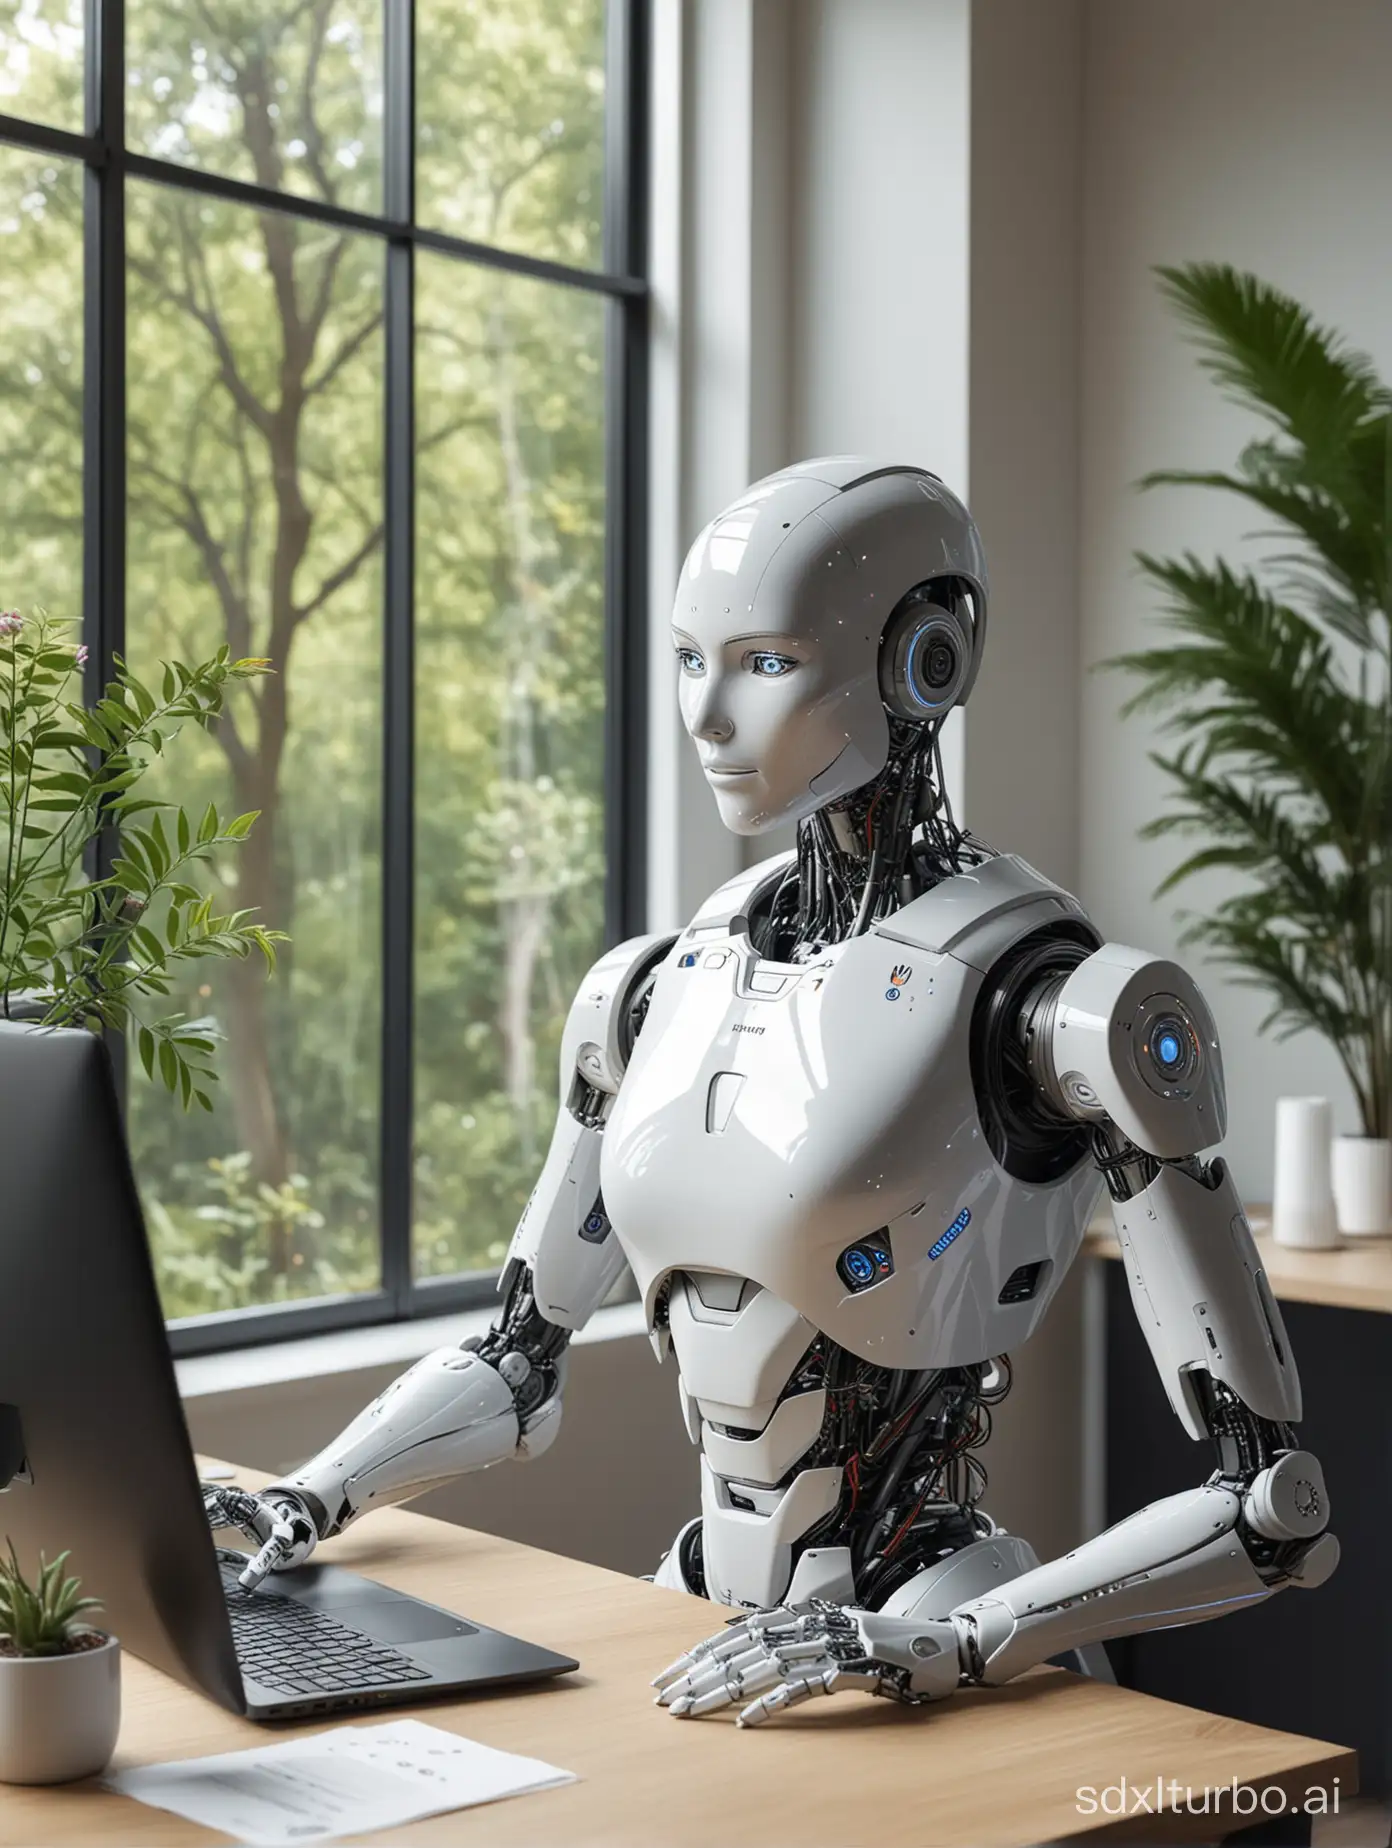 The female robot has a Huawei log emblazoned on it,is staring intently at the monitor in front of it, side view，which shows a code editor, alongside a laptop and some files. In addition, there is a cup of coffee and a potted plant and a bouquet of flowers on the desk, elements that add a touch of life to the scene and make the robot's image seem more humanized. In the background, a large window brings plenty of light into the room, and the trees outside the window are faintly visible, adding a touch of nature to the whole scene. The layout of the whole office is simple and modern, full of futuristic feeling, but also reveals a cozy and peaceful atmosphere